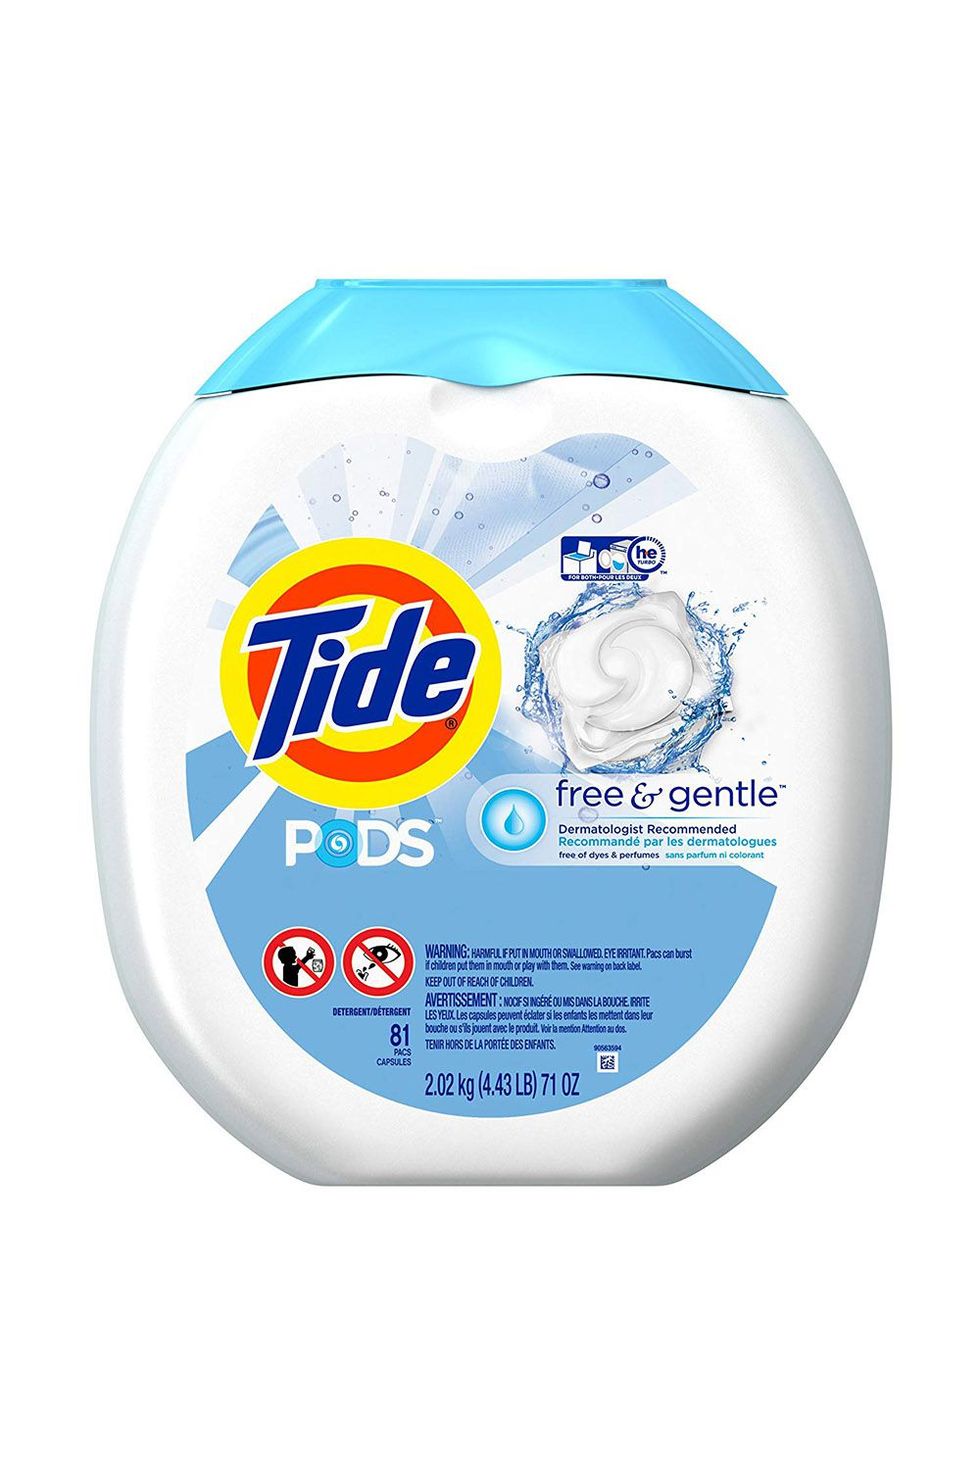 This Scent-Free Laundry Detergent 